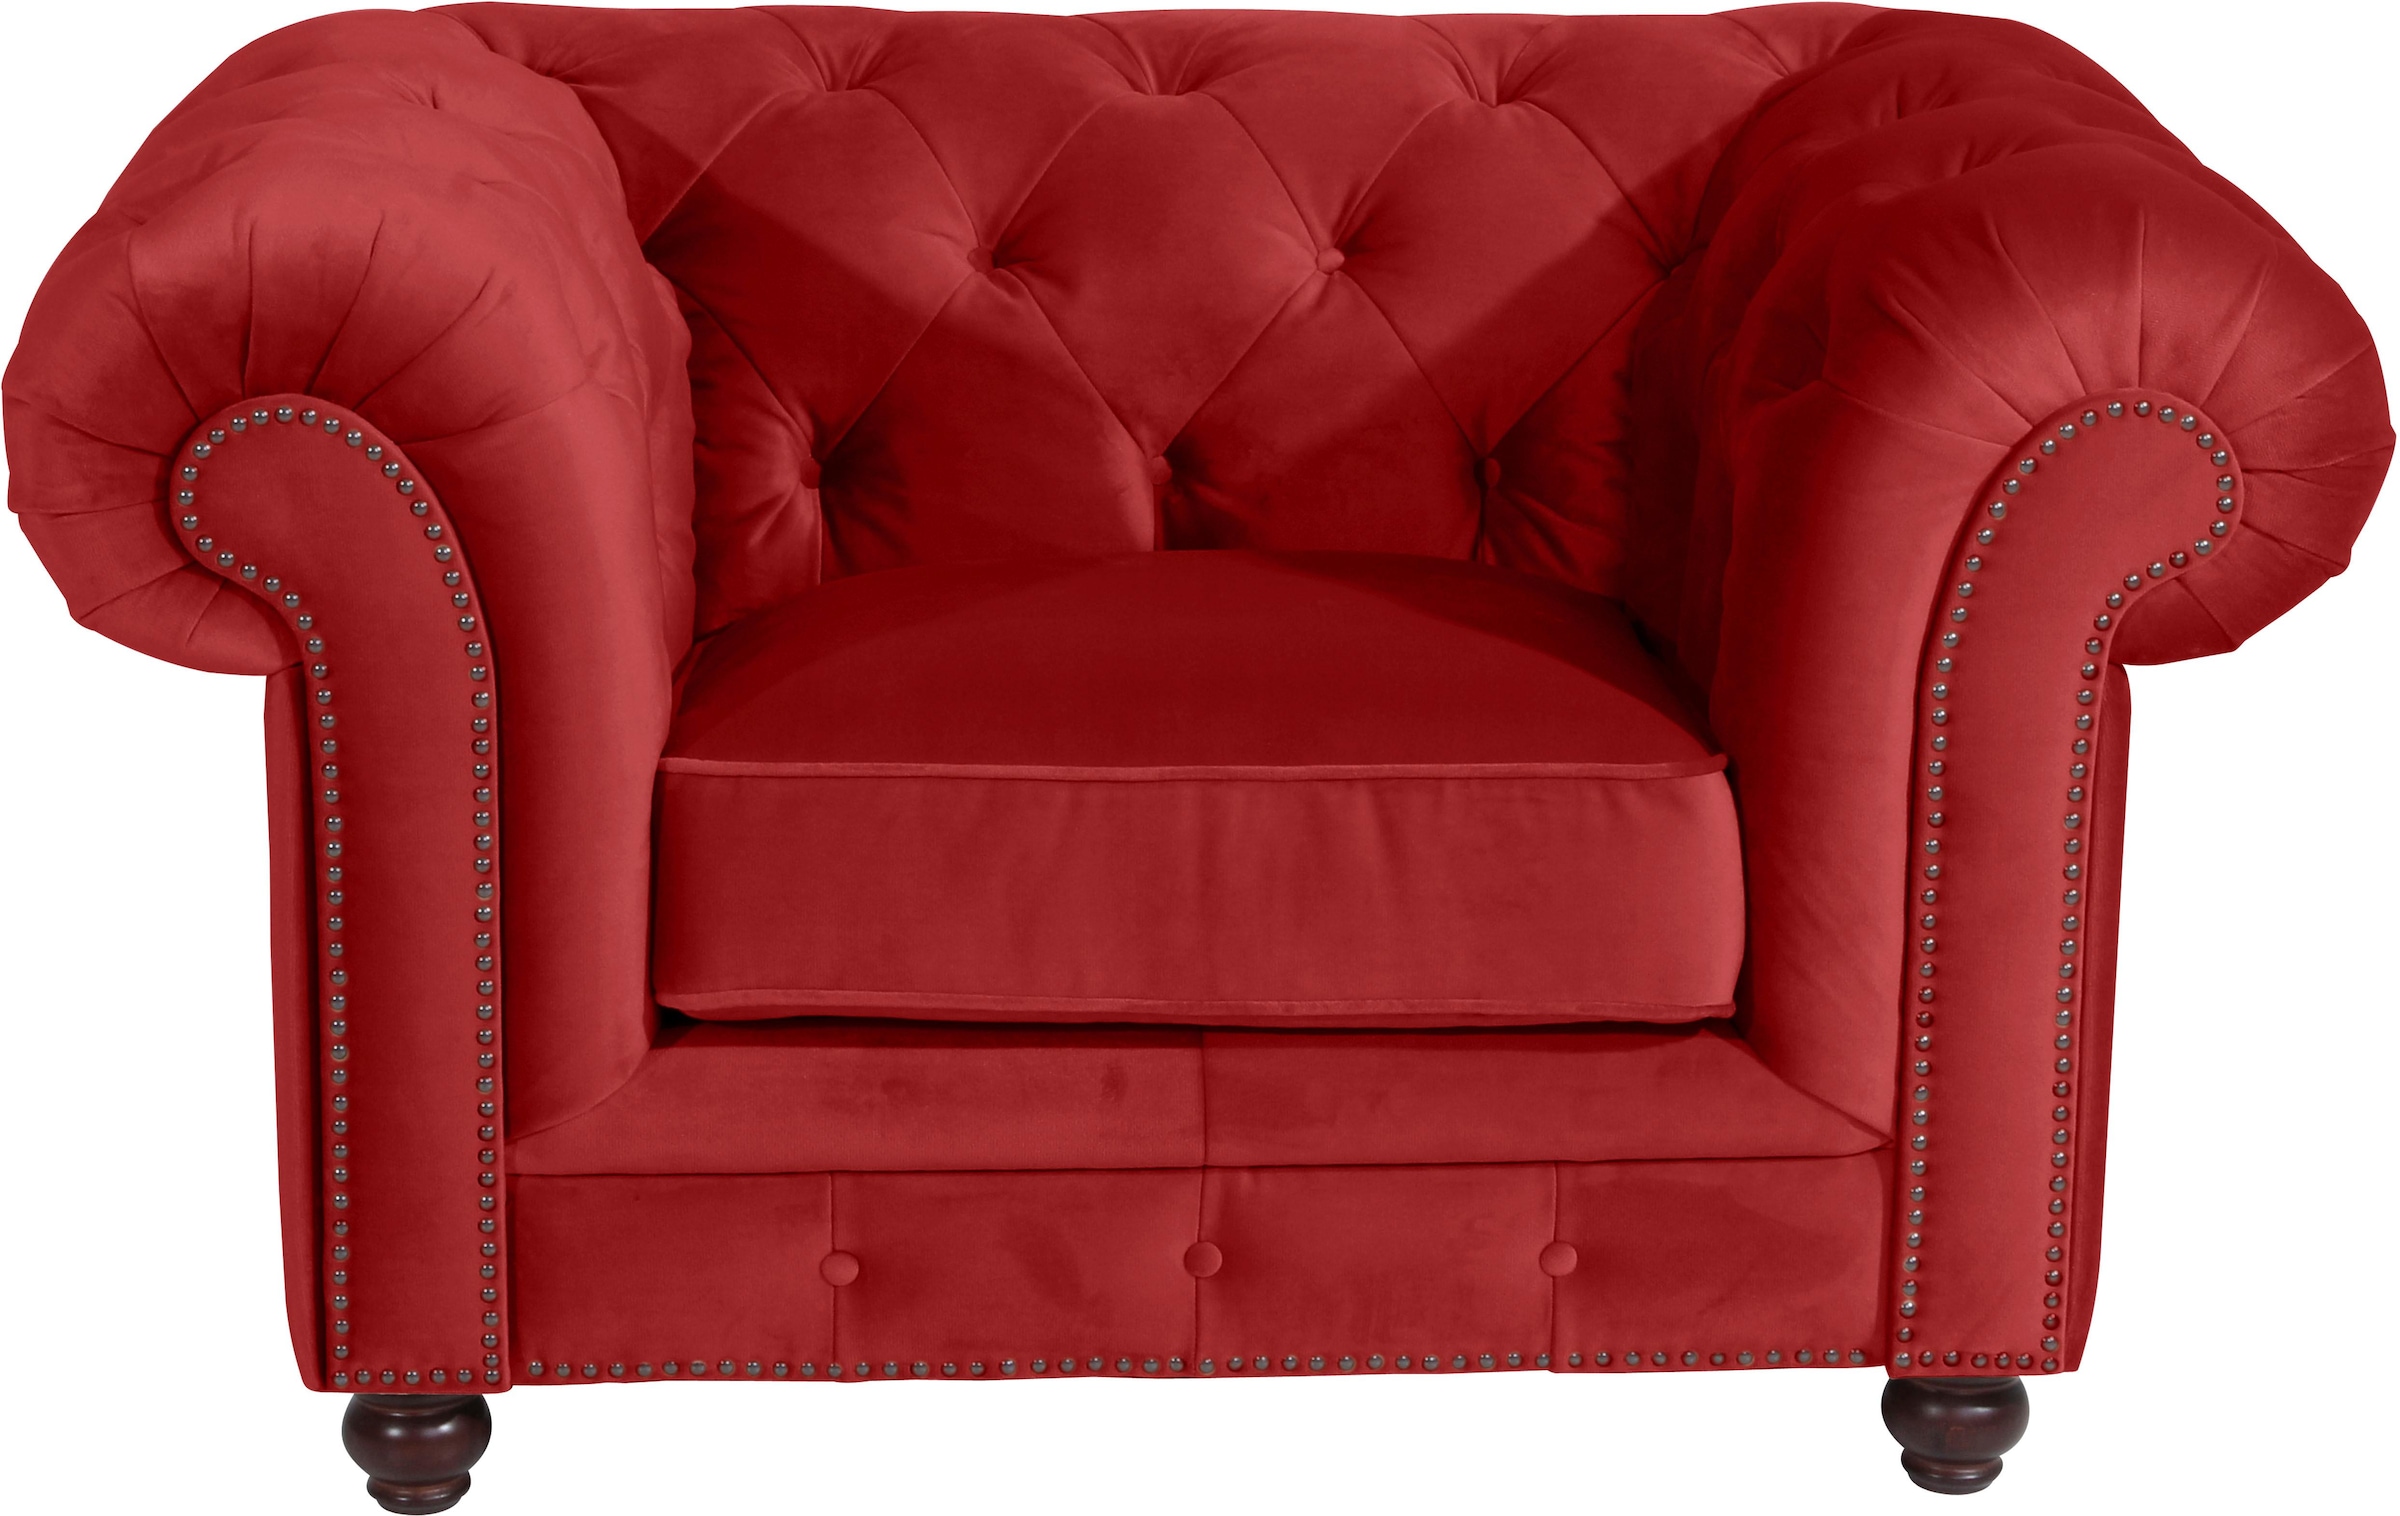 Chesterfield-Sessel »Old England«, mit edler Knopfheftung